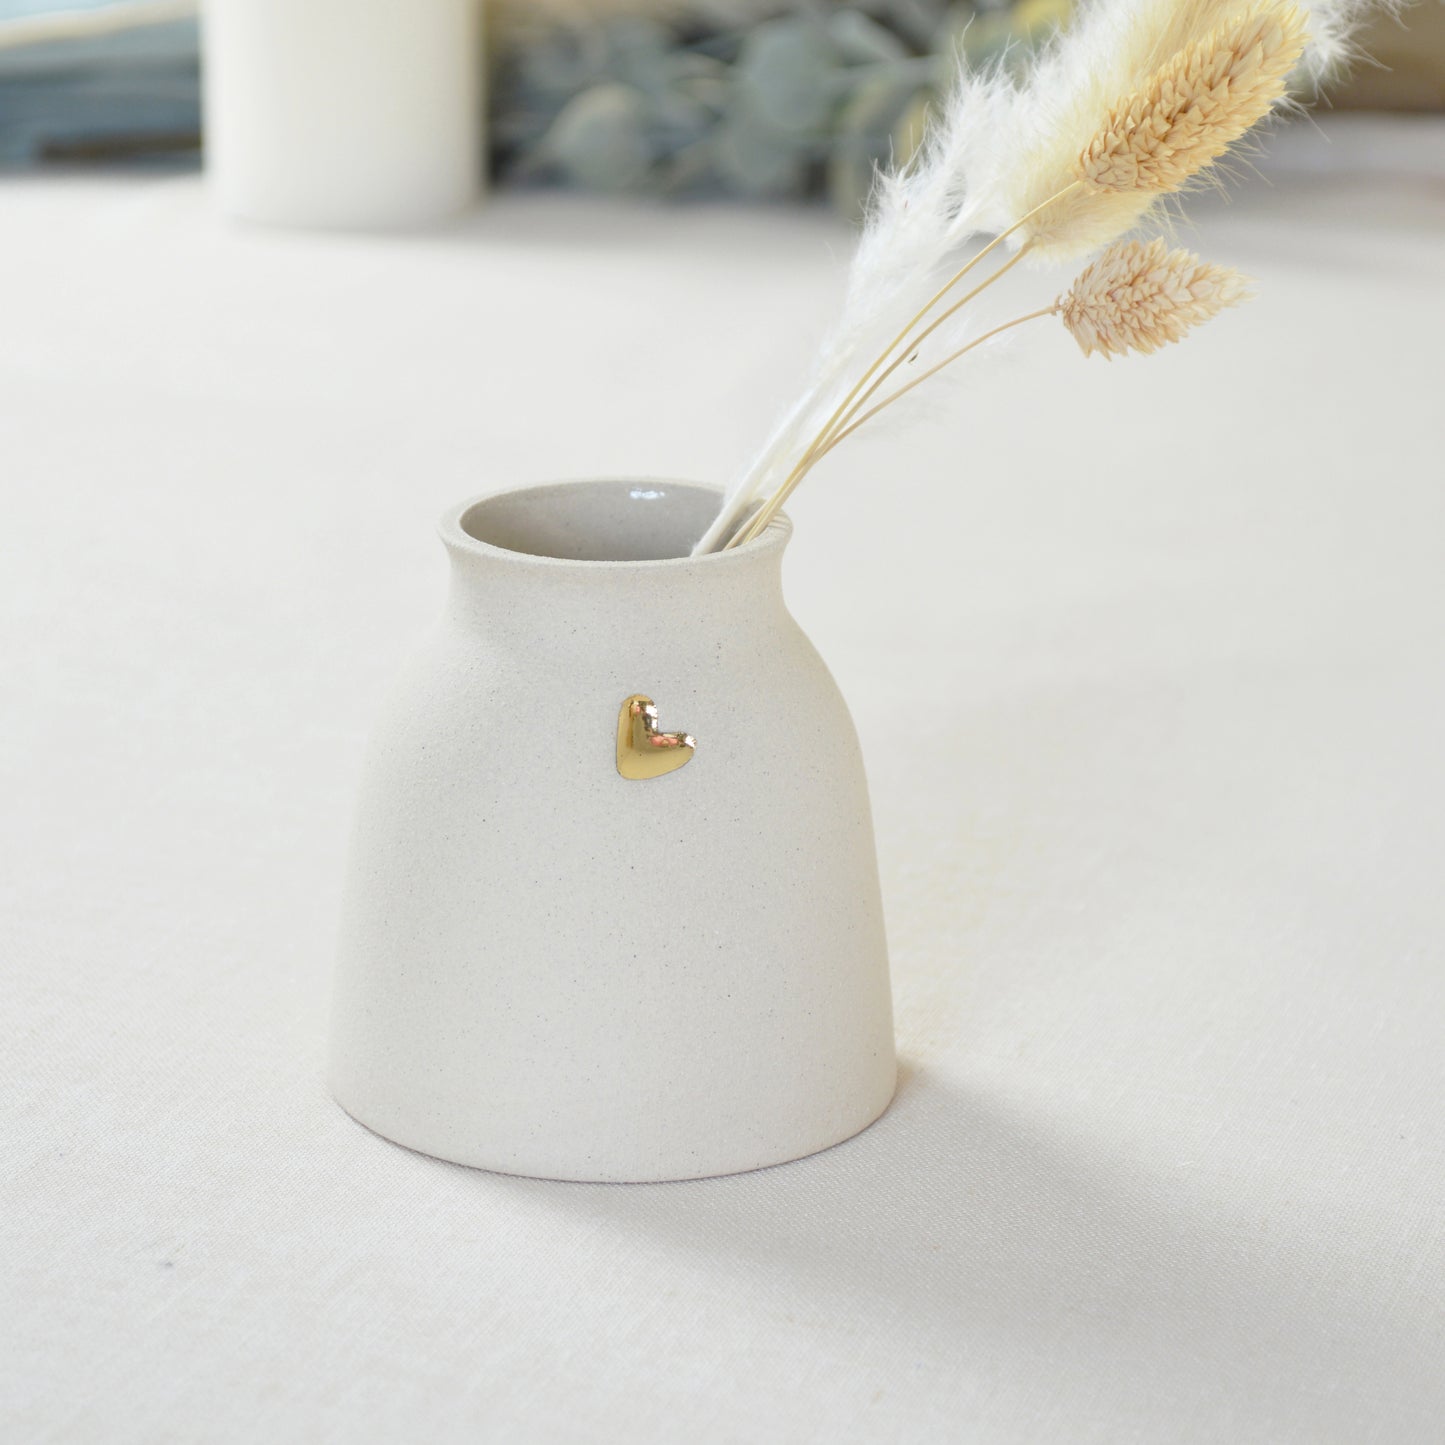 Small Cream Ceramic Vase With A Gold Embossed Heart | Neutral Vase | Flower Vase | Mother's Day | Stoneware